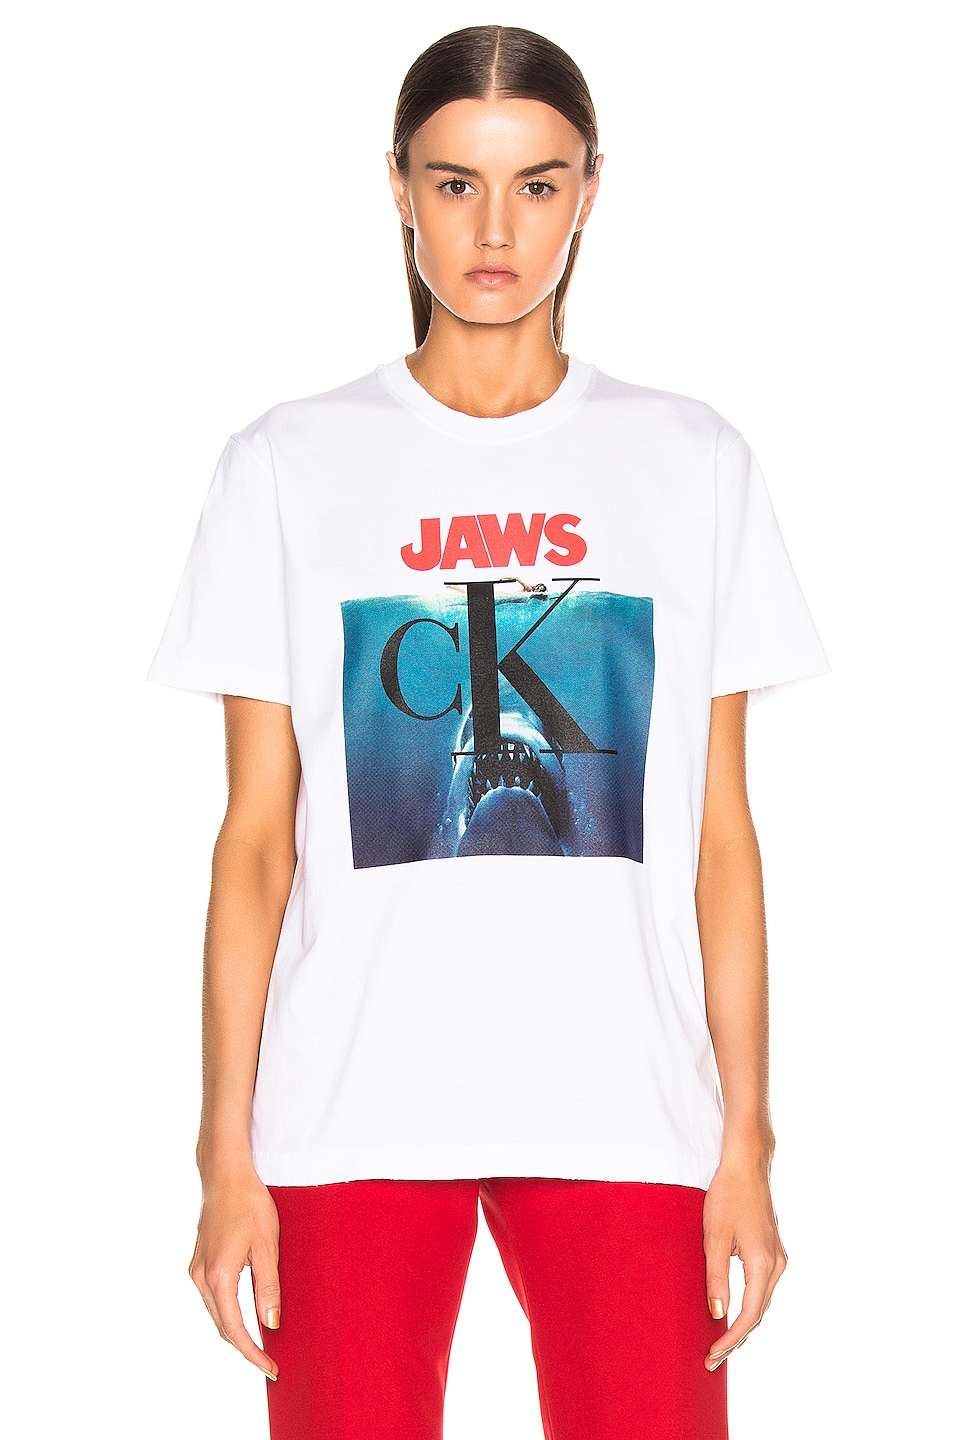 Image 1 of CALVIN KLEIN 205W39NYC Jaws Tee Shirt in Optic White